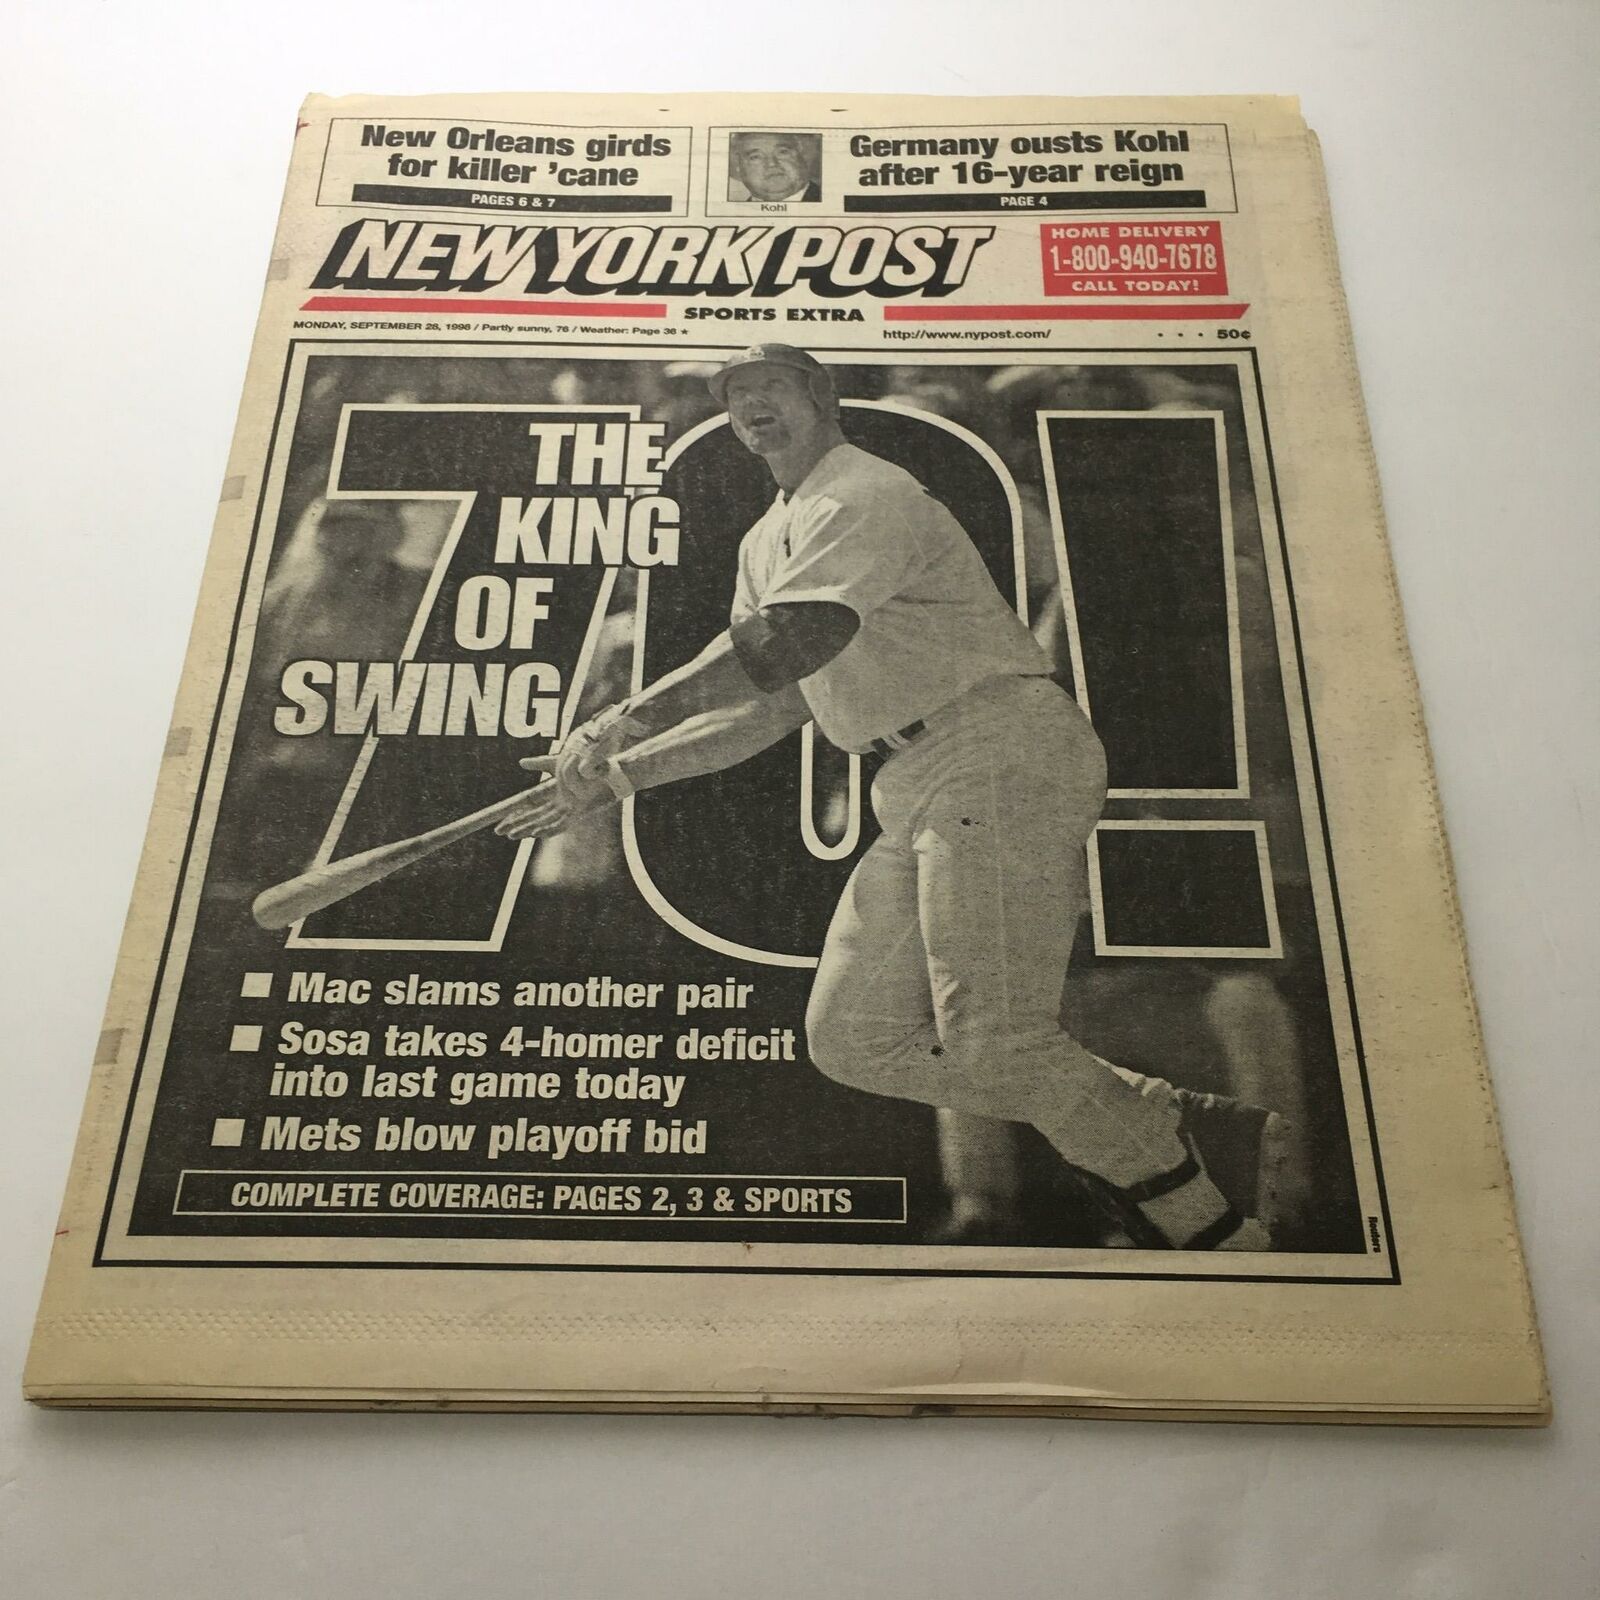 New York Post: Sept 28 1998 The King of Swing Mark Mcgwire sosa 70 hr chase